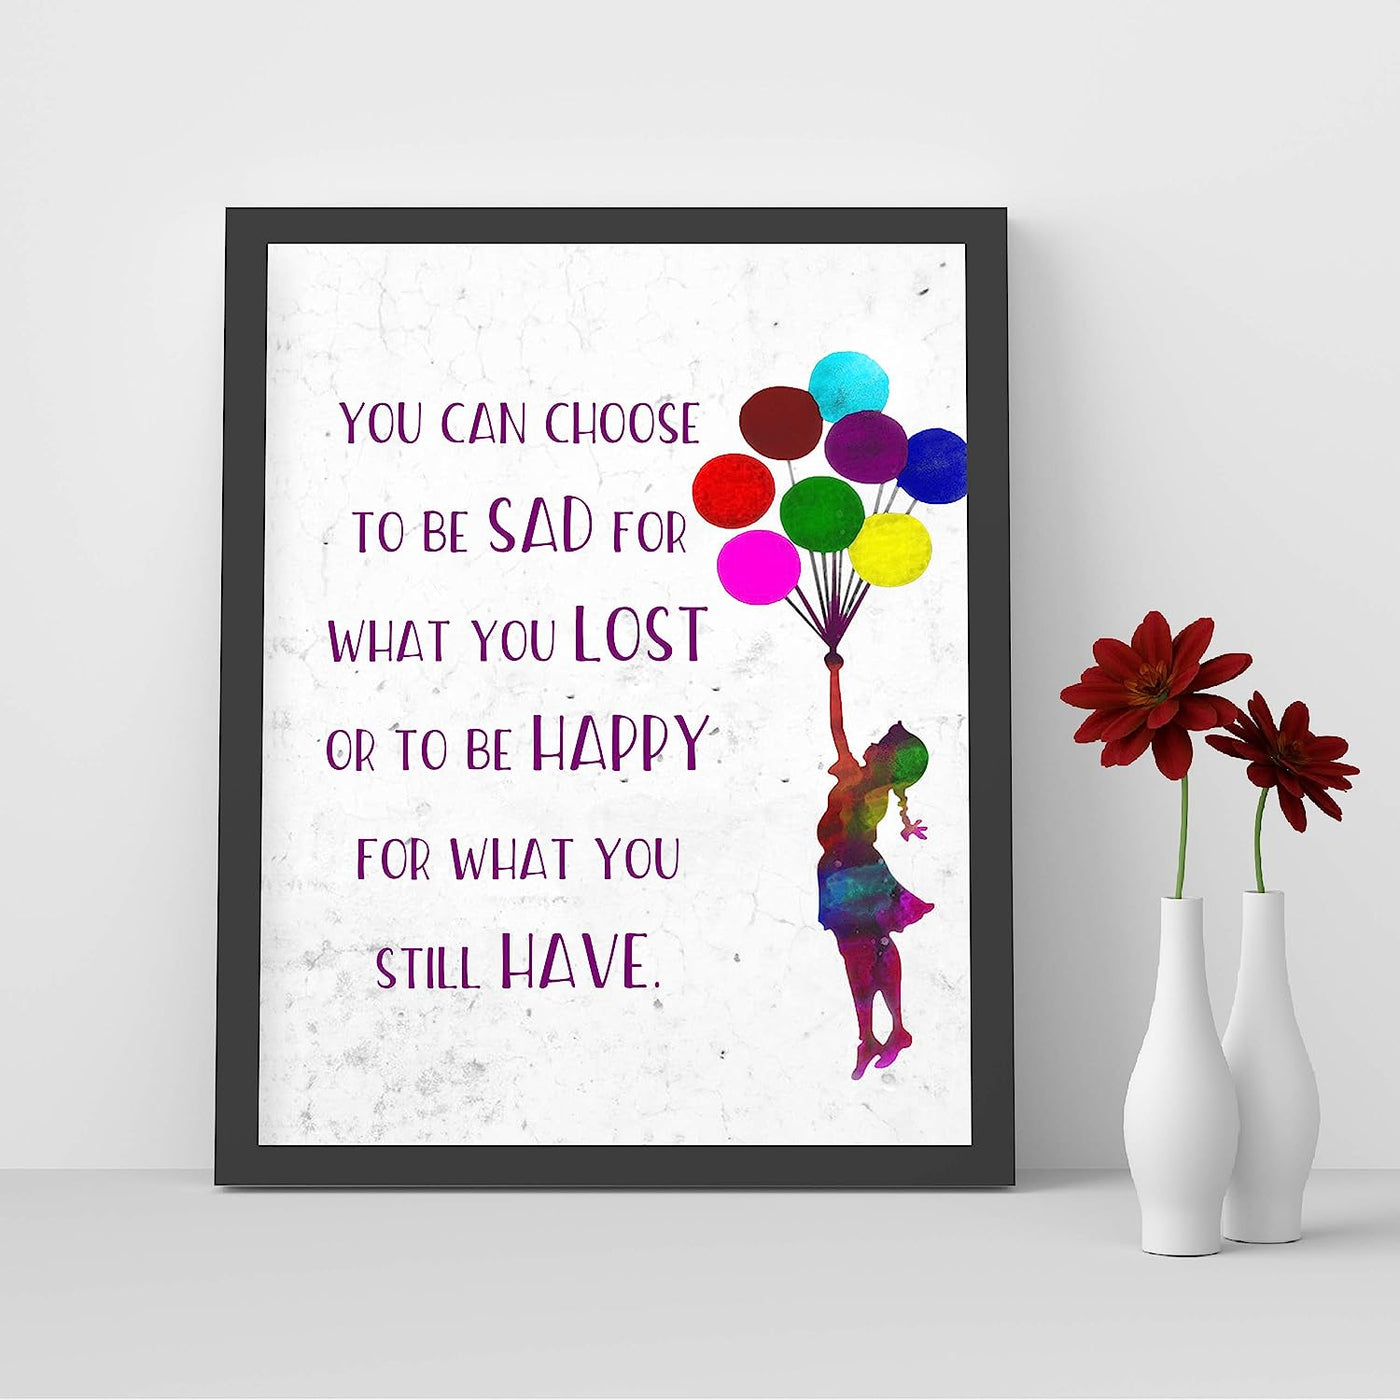 Be Happy for What You Still Have Inspirational Quotes Wall Art-8x10" Motivational Print w/Girl Holding Balloons Image-Ready to Frame. Home-Office-School-Nursery Decor. Great Reminder for Happiness!